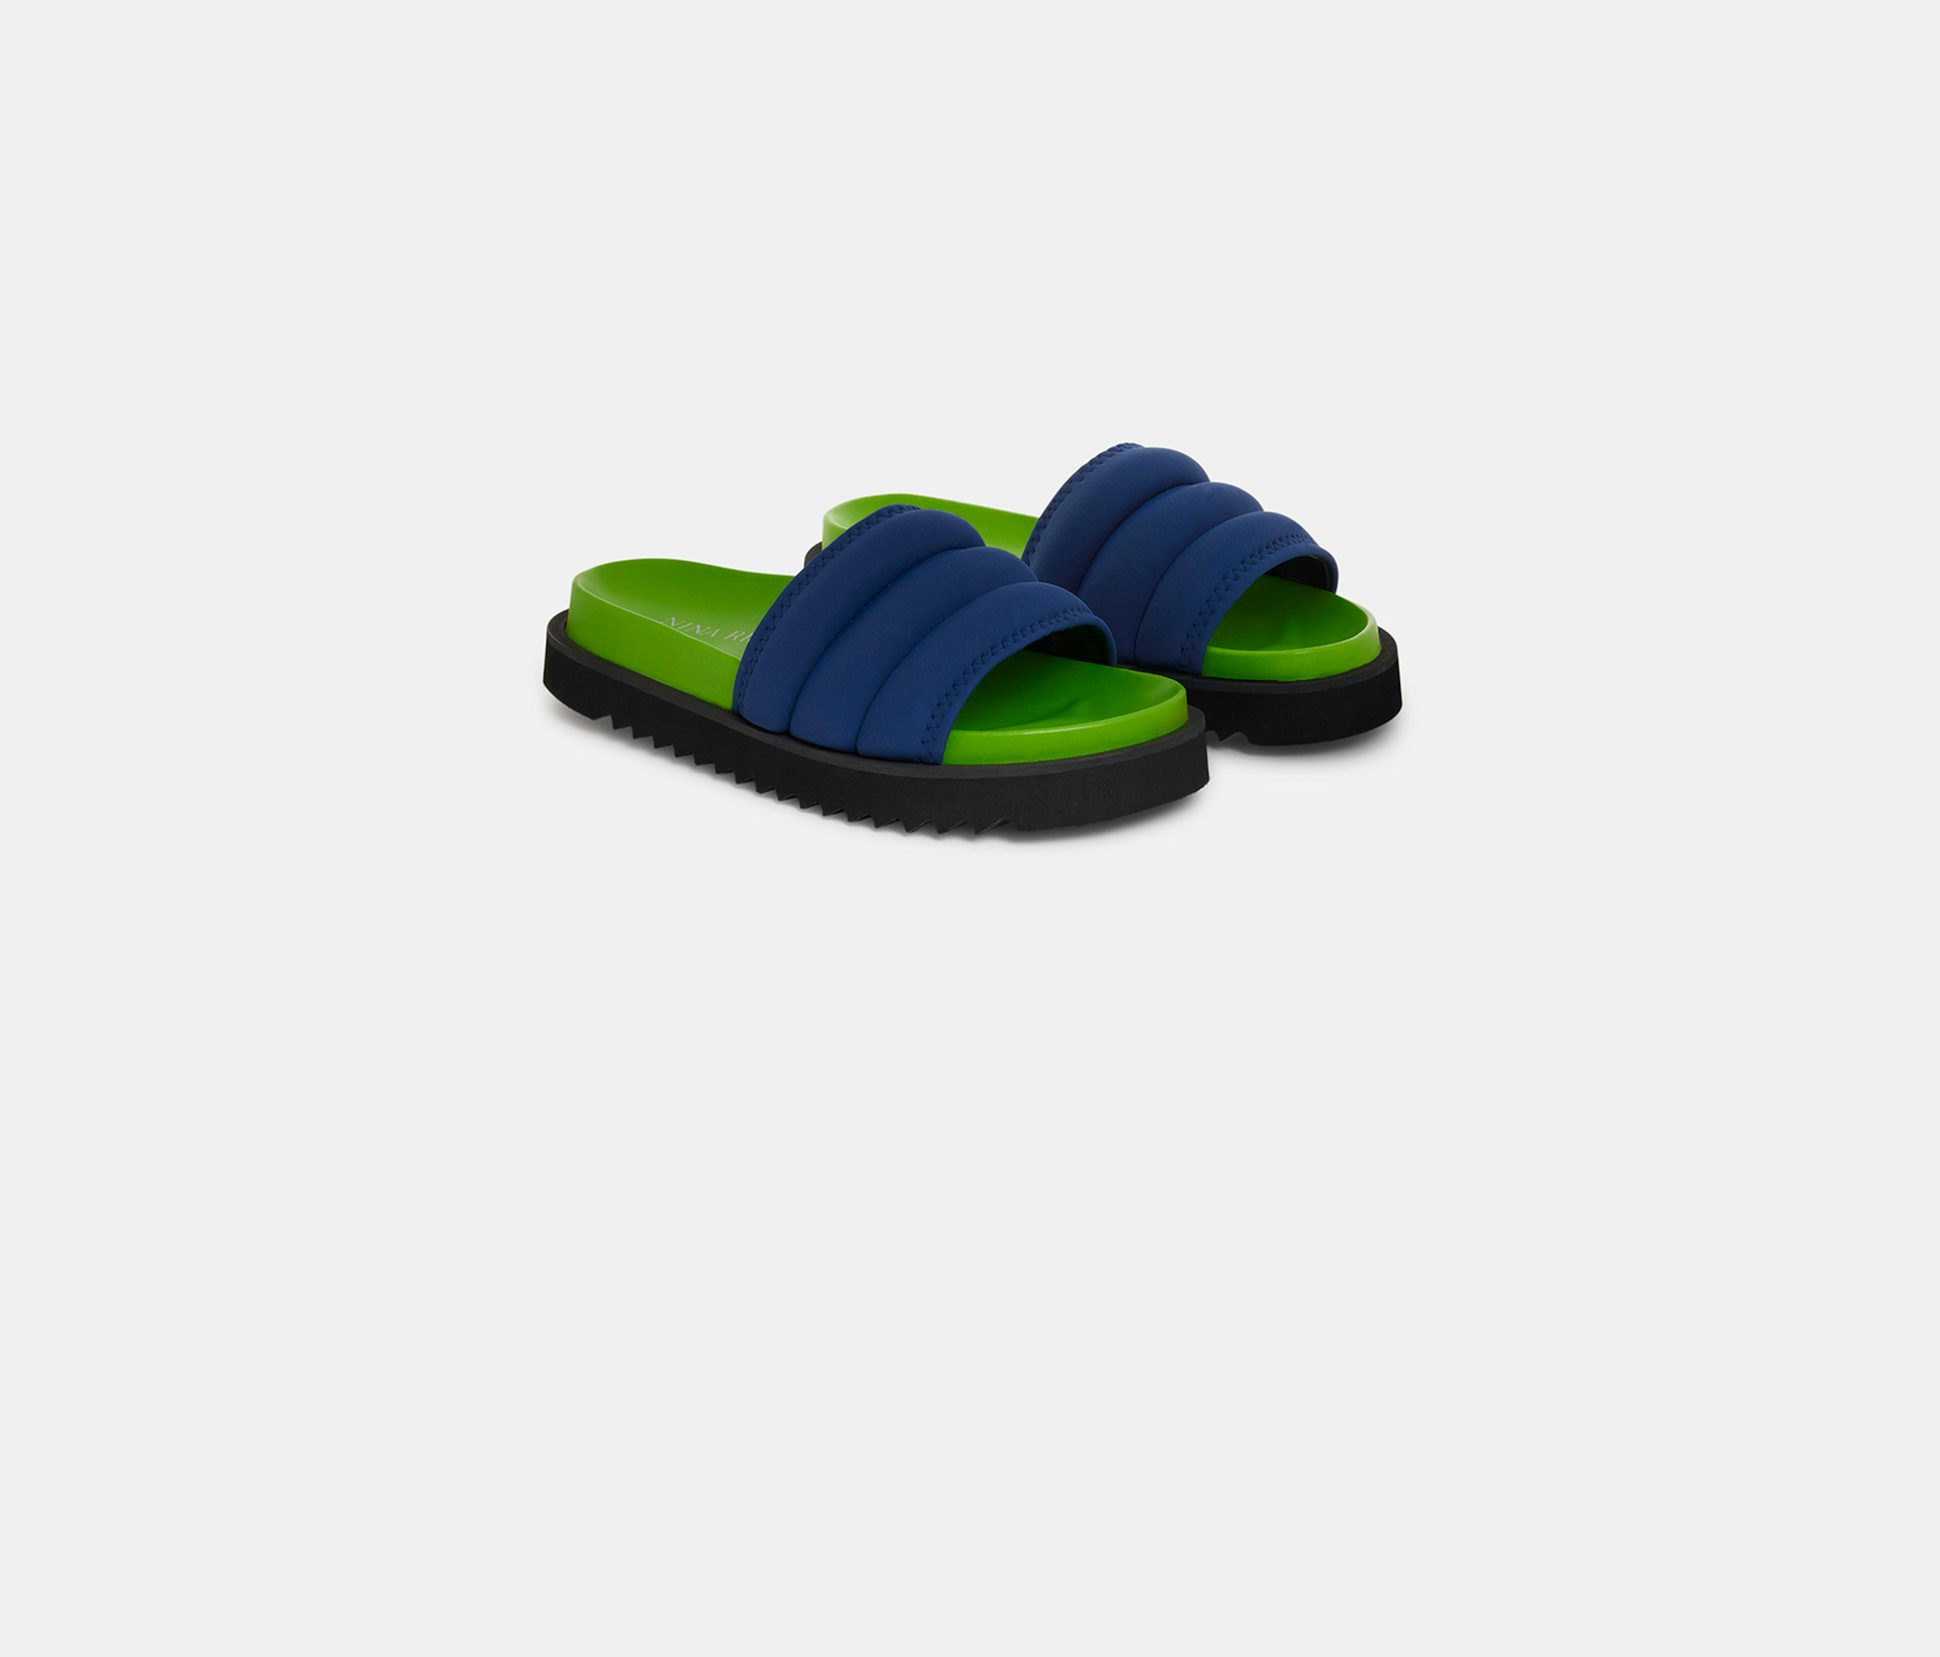 Quilted Dark Navy Blue Neoprene Slides with Green Leather Sole - Nina Ricci